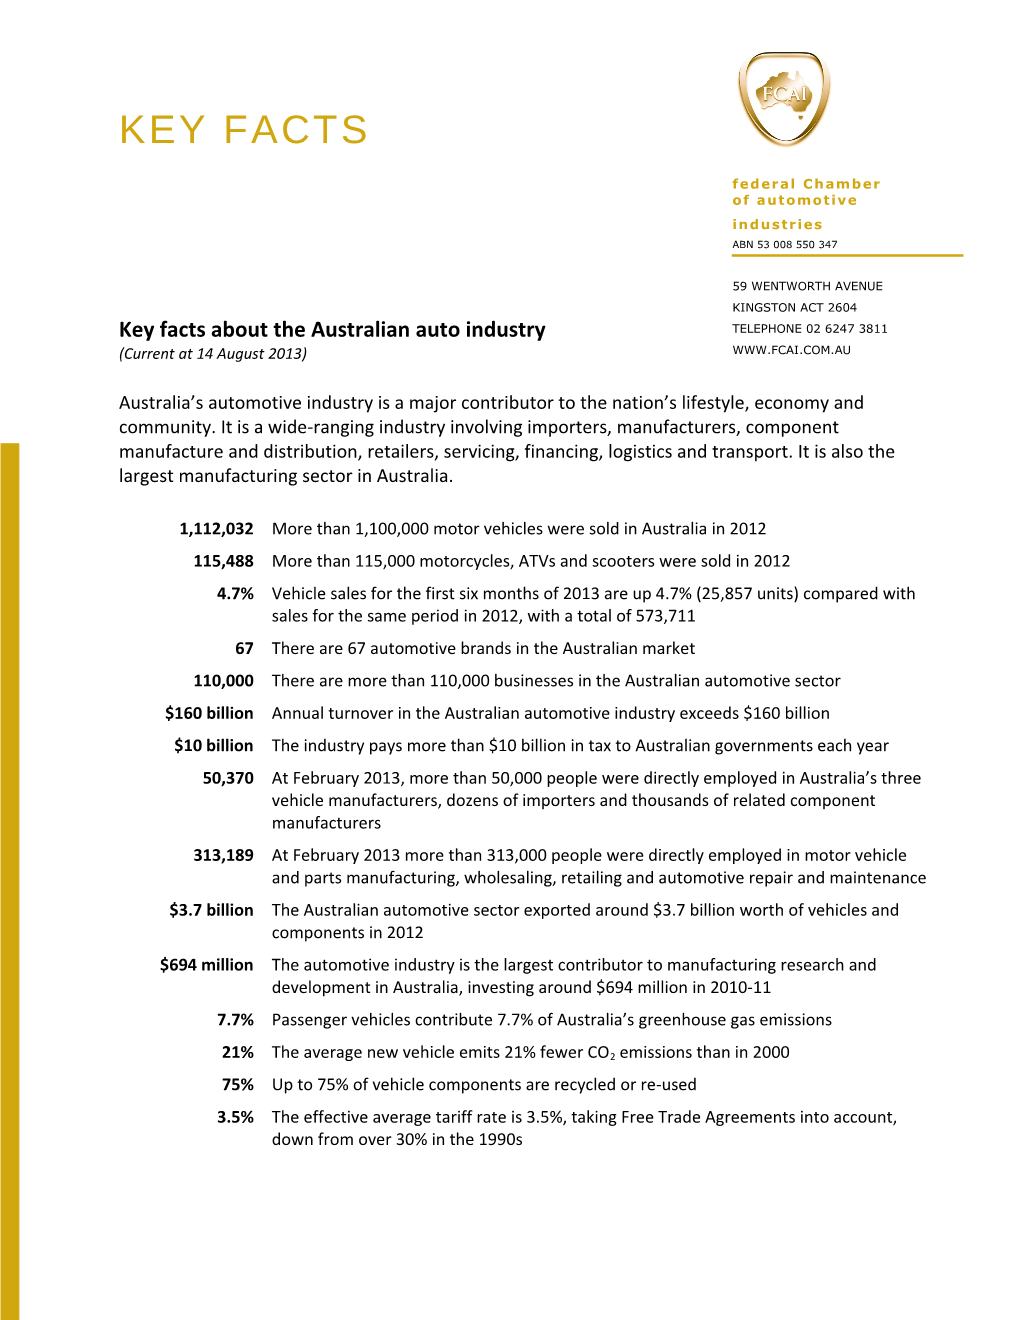 Key Facts About the Australian Auto Industry